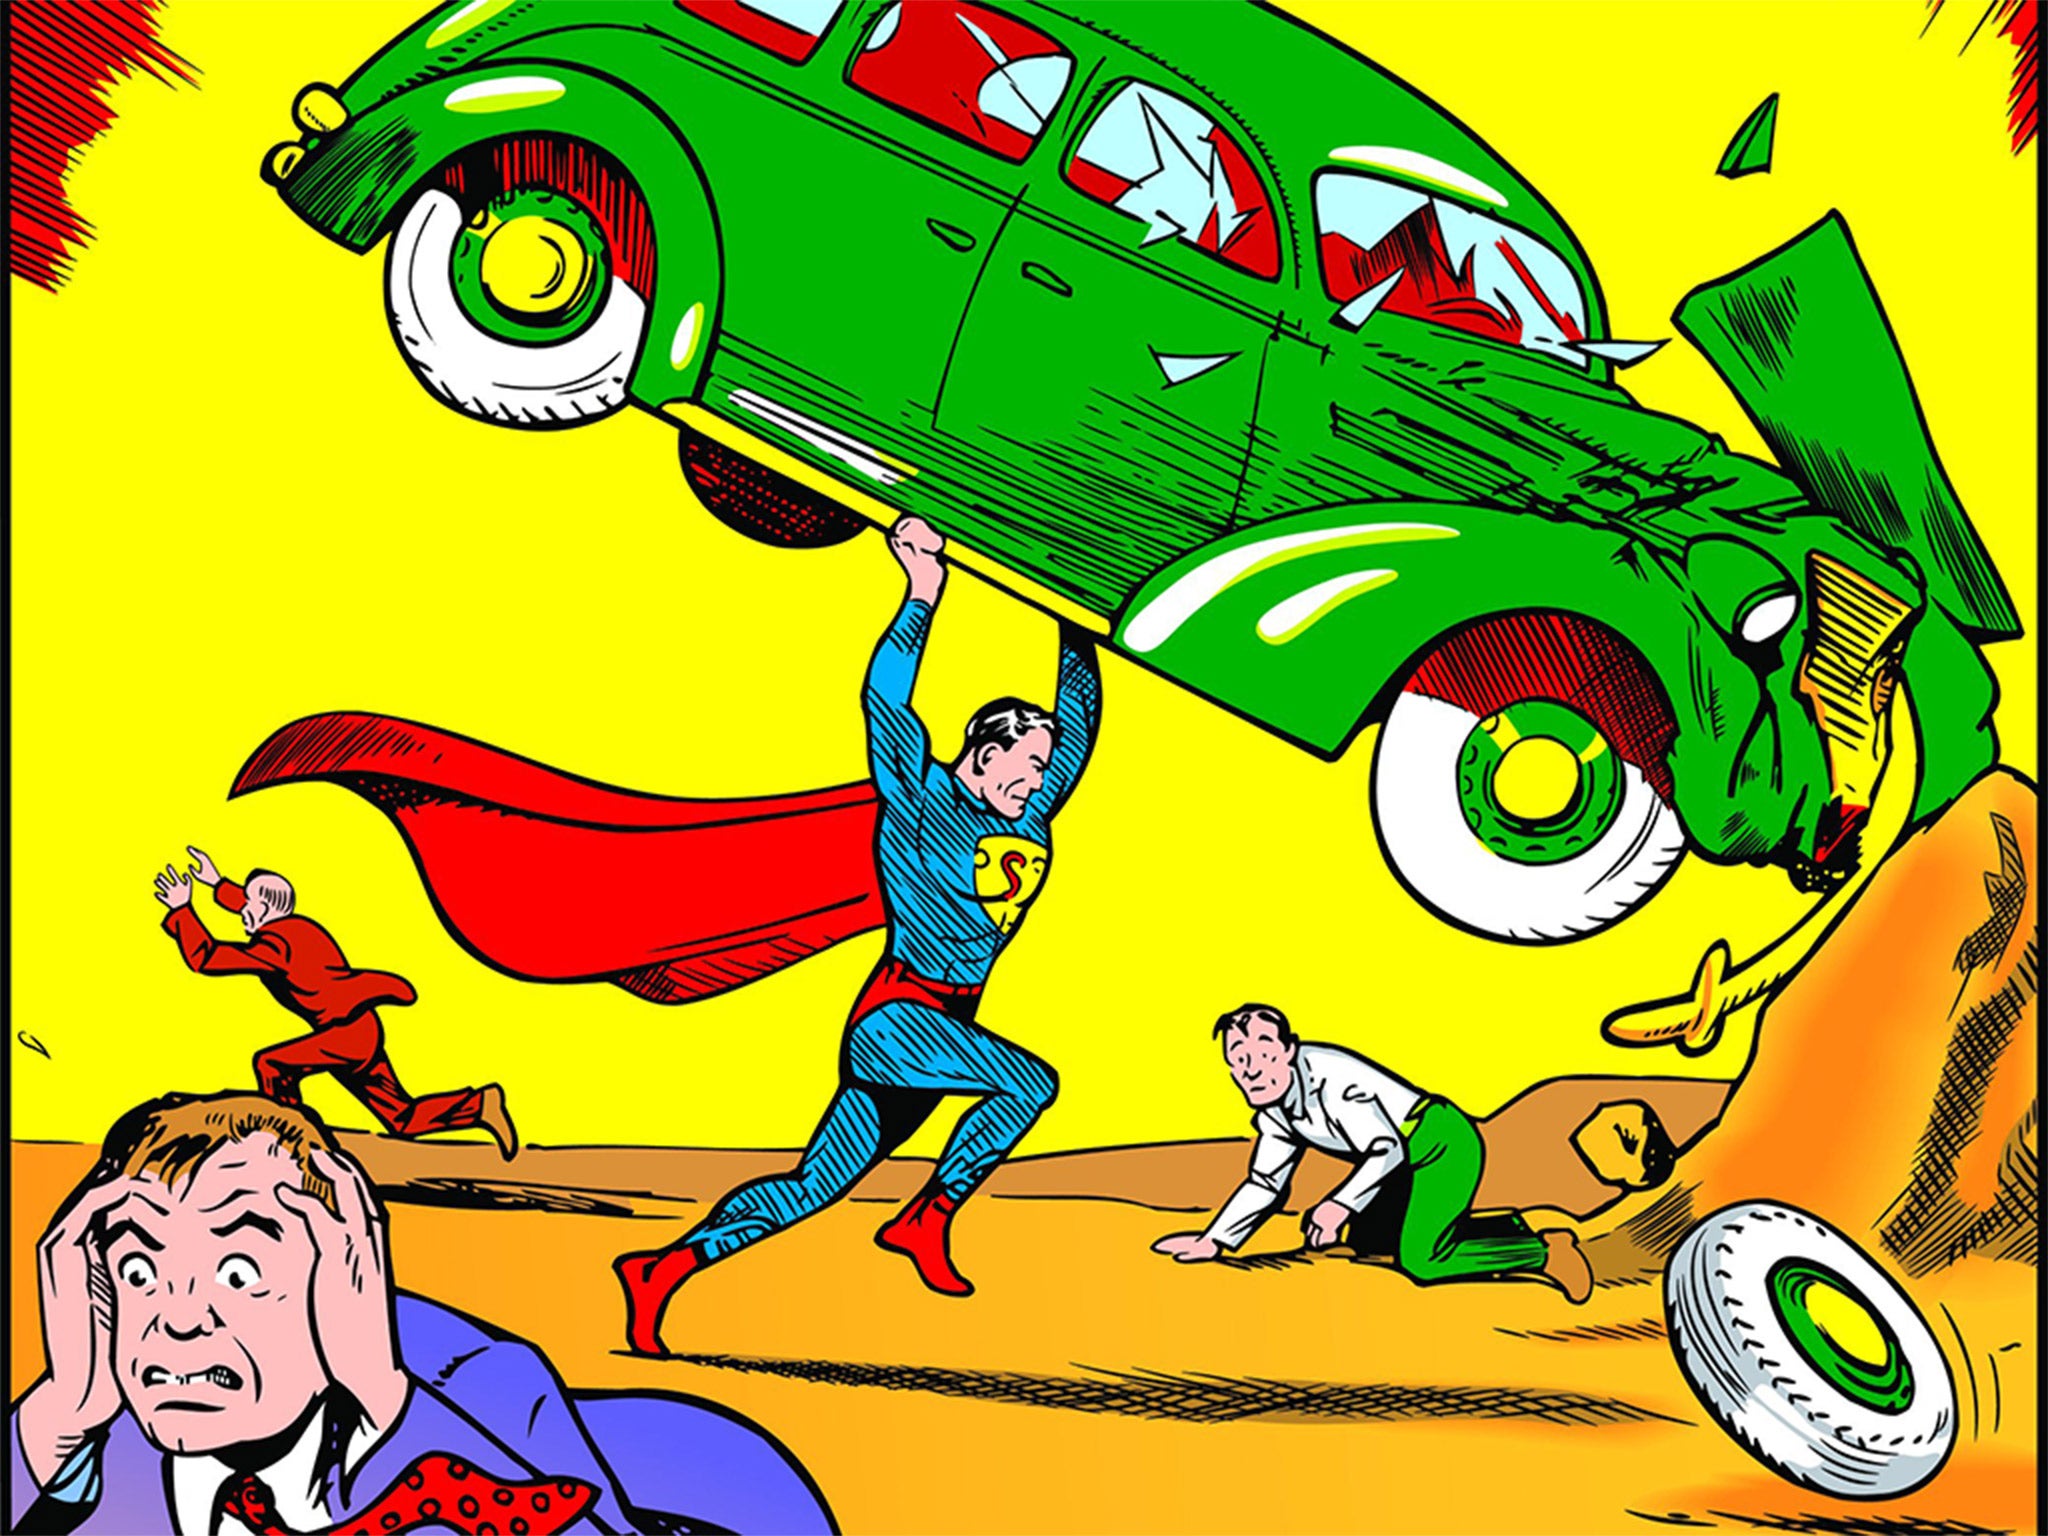 Superman at 80: The Jewish origins of the Man of Steel and the